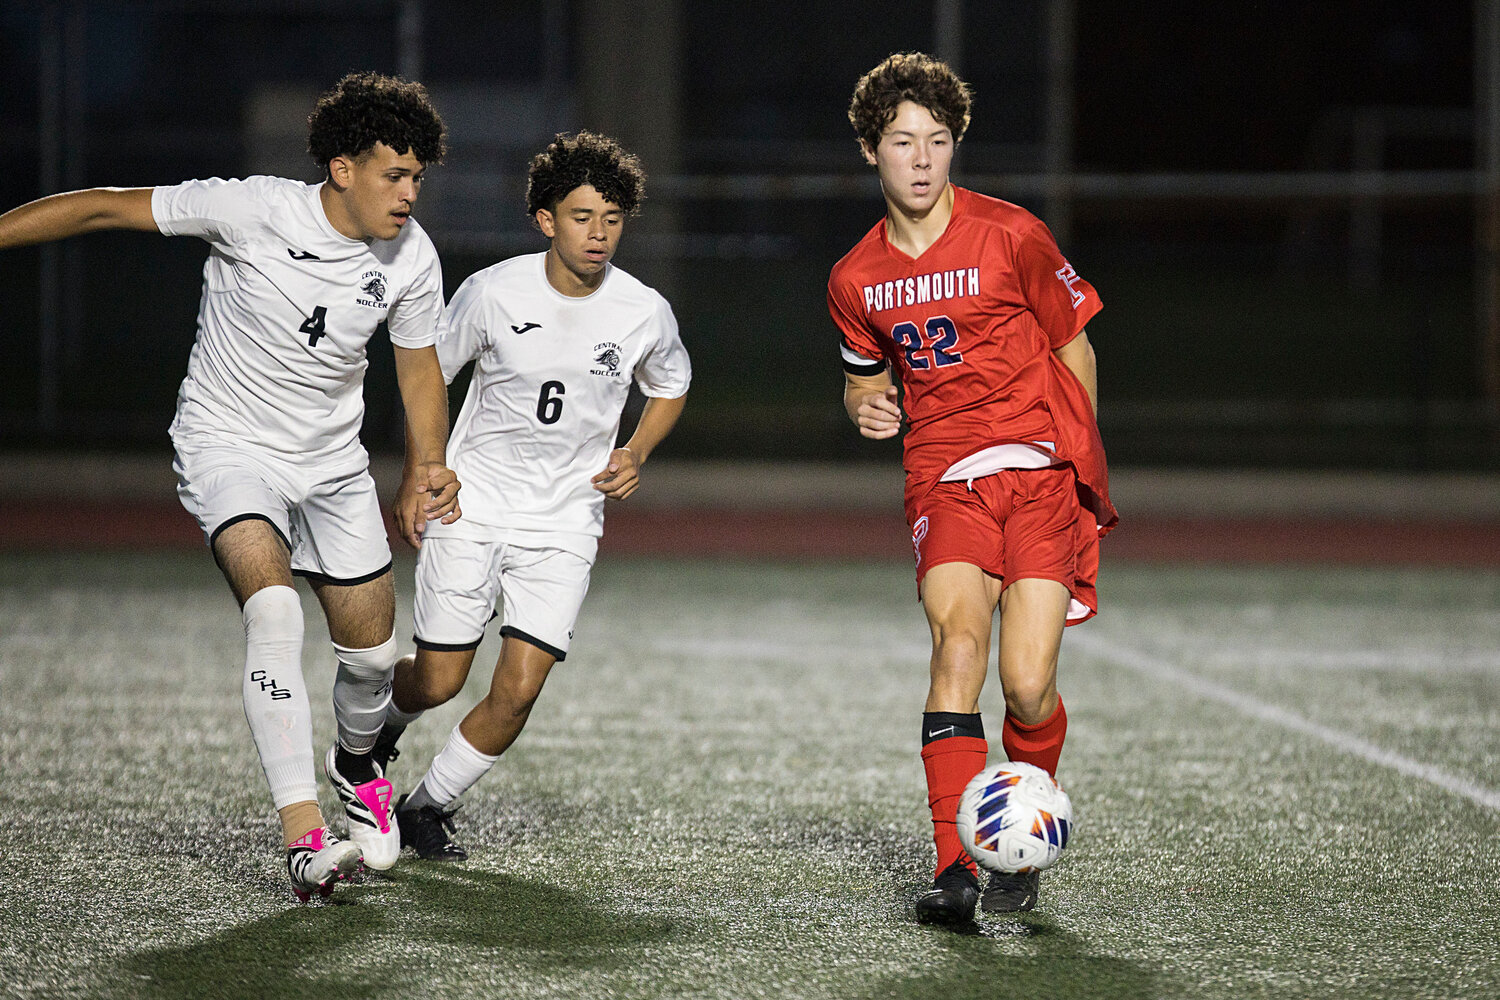 Aidan Chen dishes off a pass as a pair of Central defenders close in.